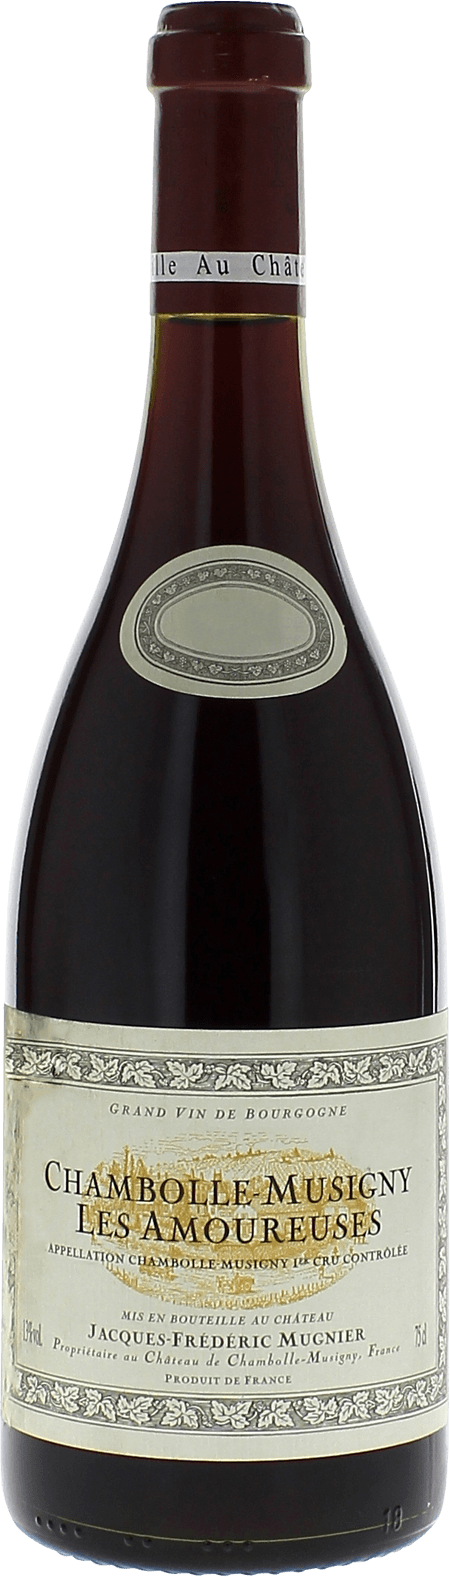 Chambolle musigny 1er cru les amoureuses 2011 Domaine MUGNIER Jacques Frederic, Bourgogne rouge